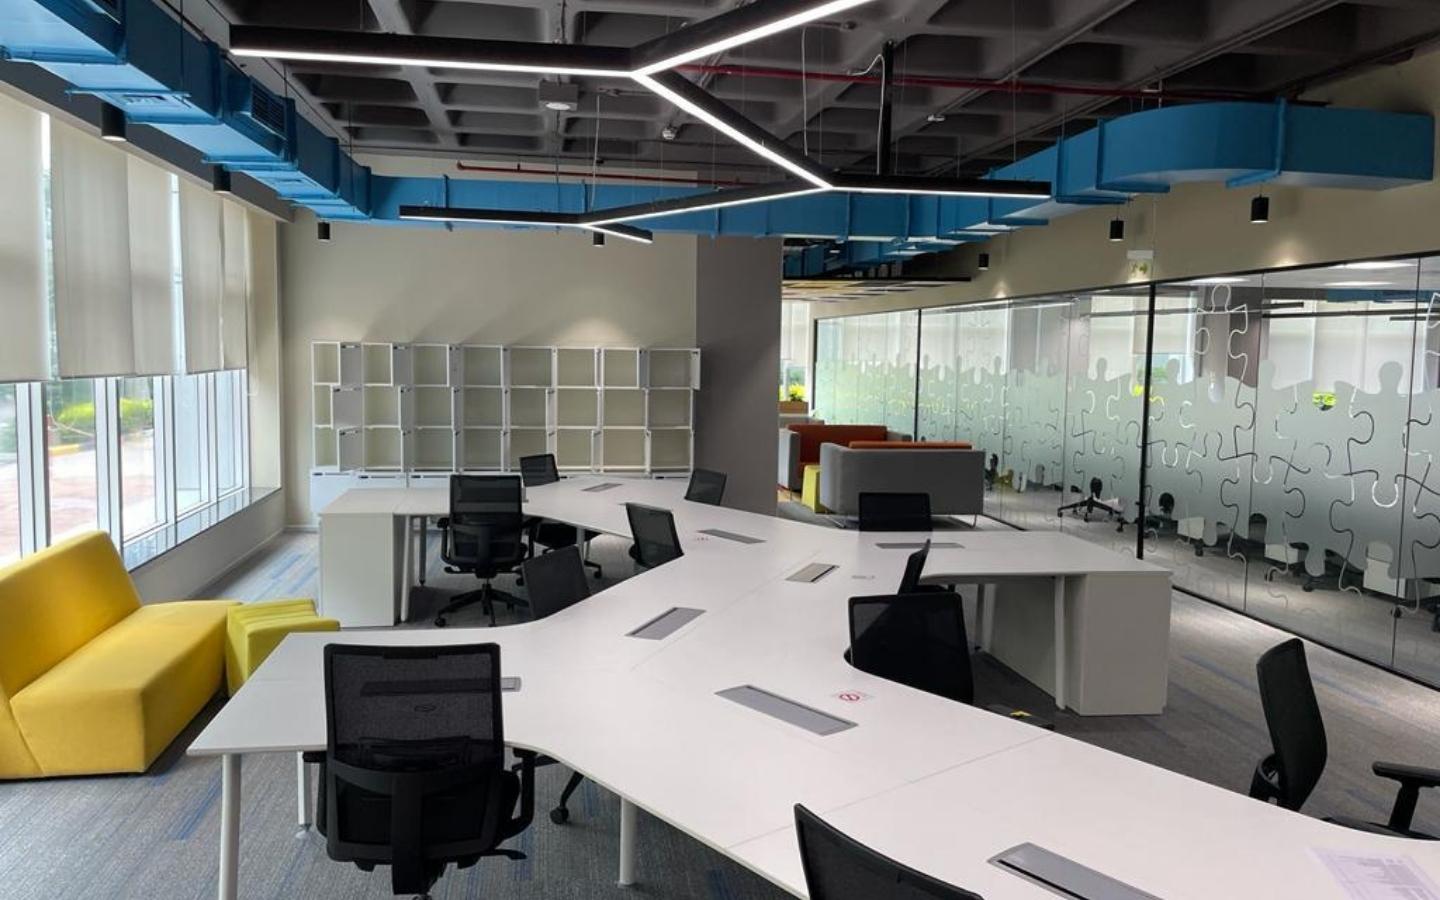 Commercial office space for rent in electronic city Bangalore.